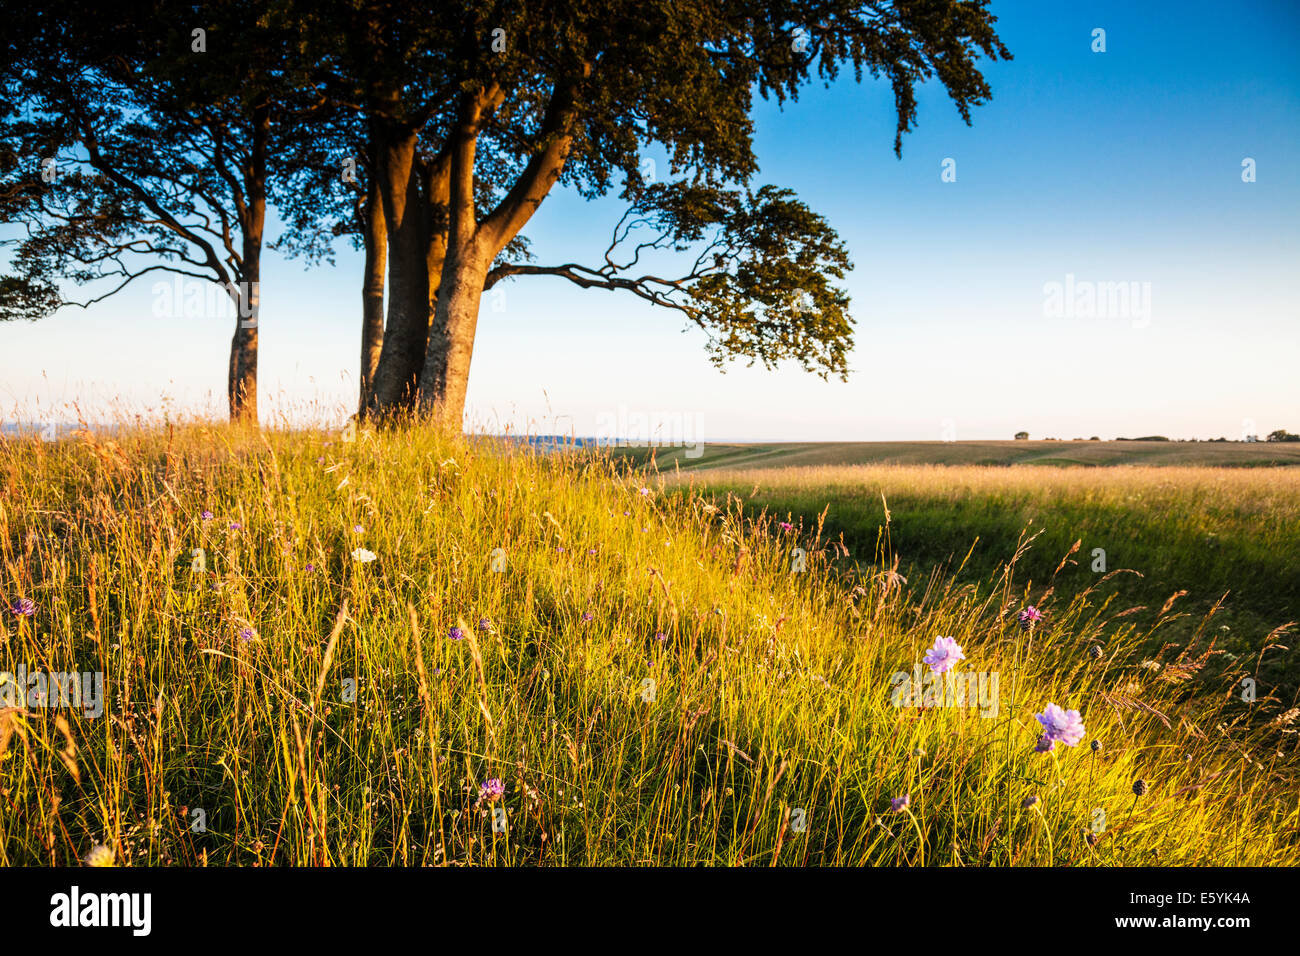 Early morning sunshine on Oliver's Castle, an iron age hillfort on Roundway Hill near Devizes, Wiltshire. Stock Photo